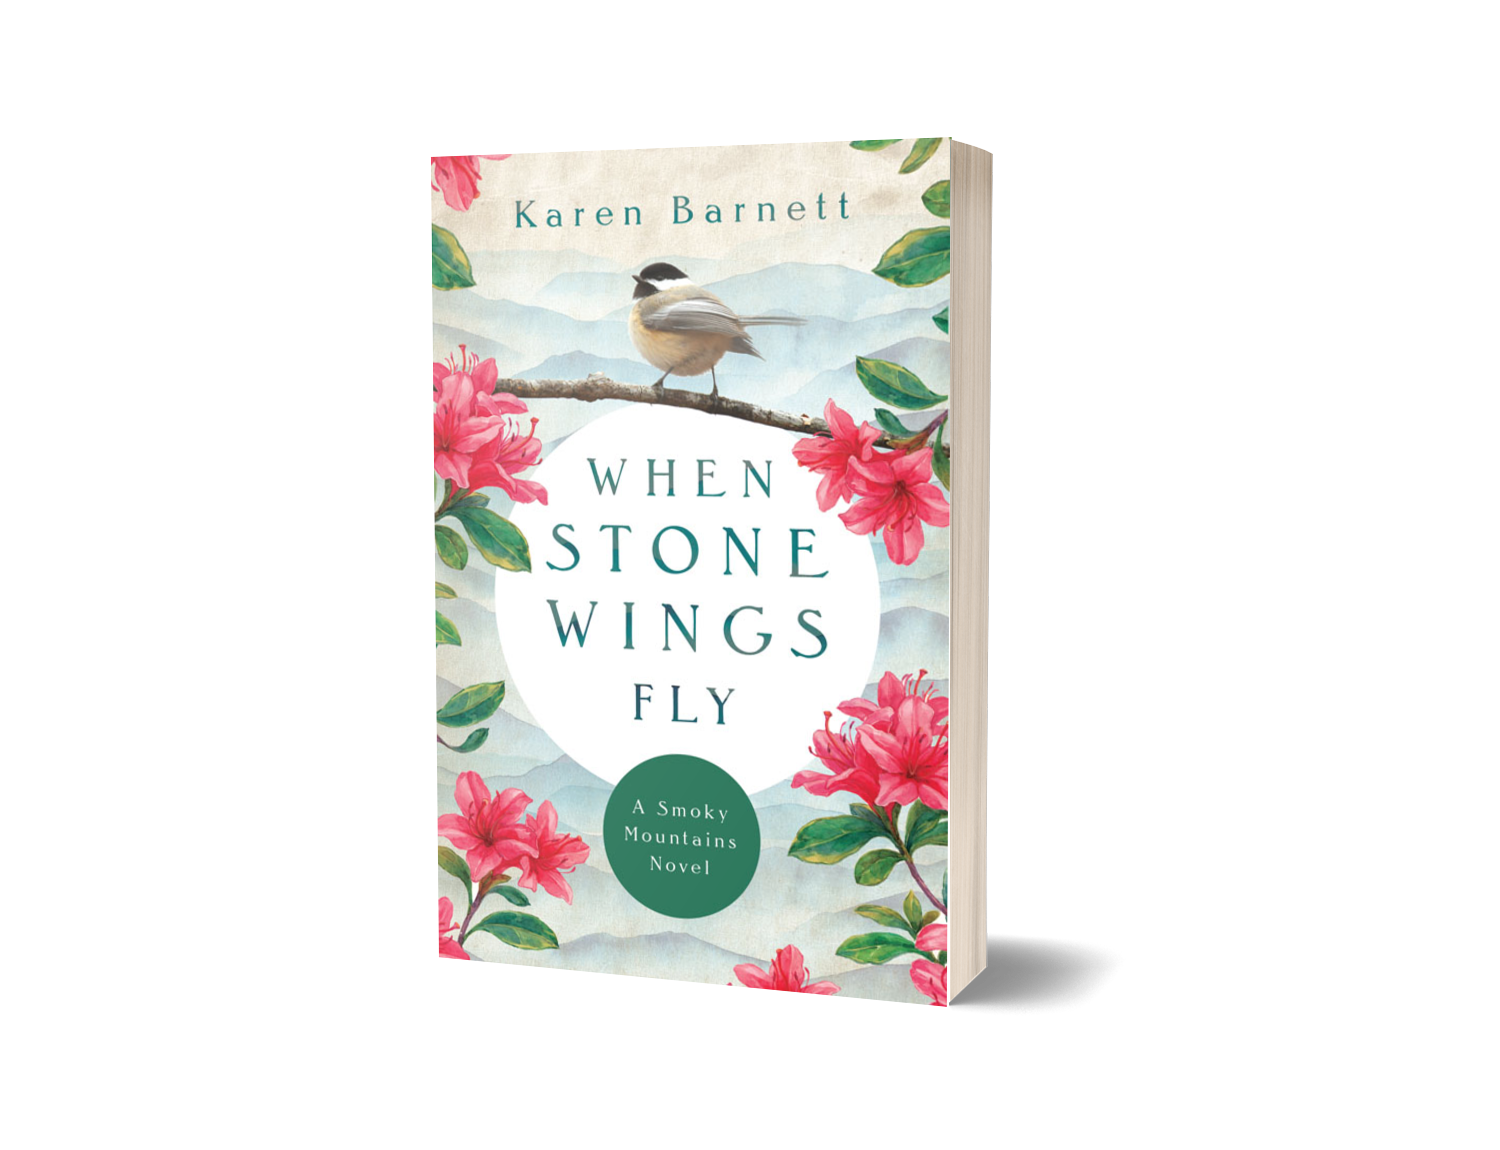 Excerpt: When Stone Wings Fly